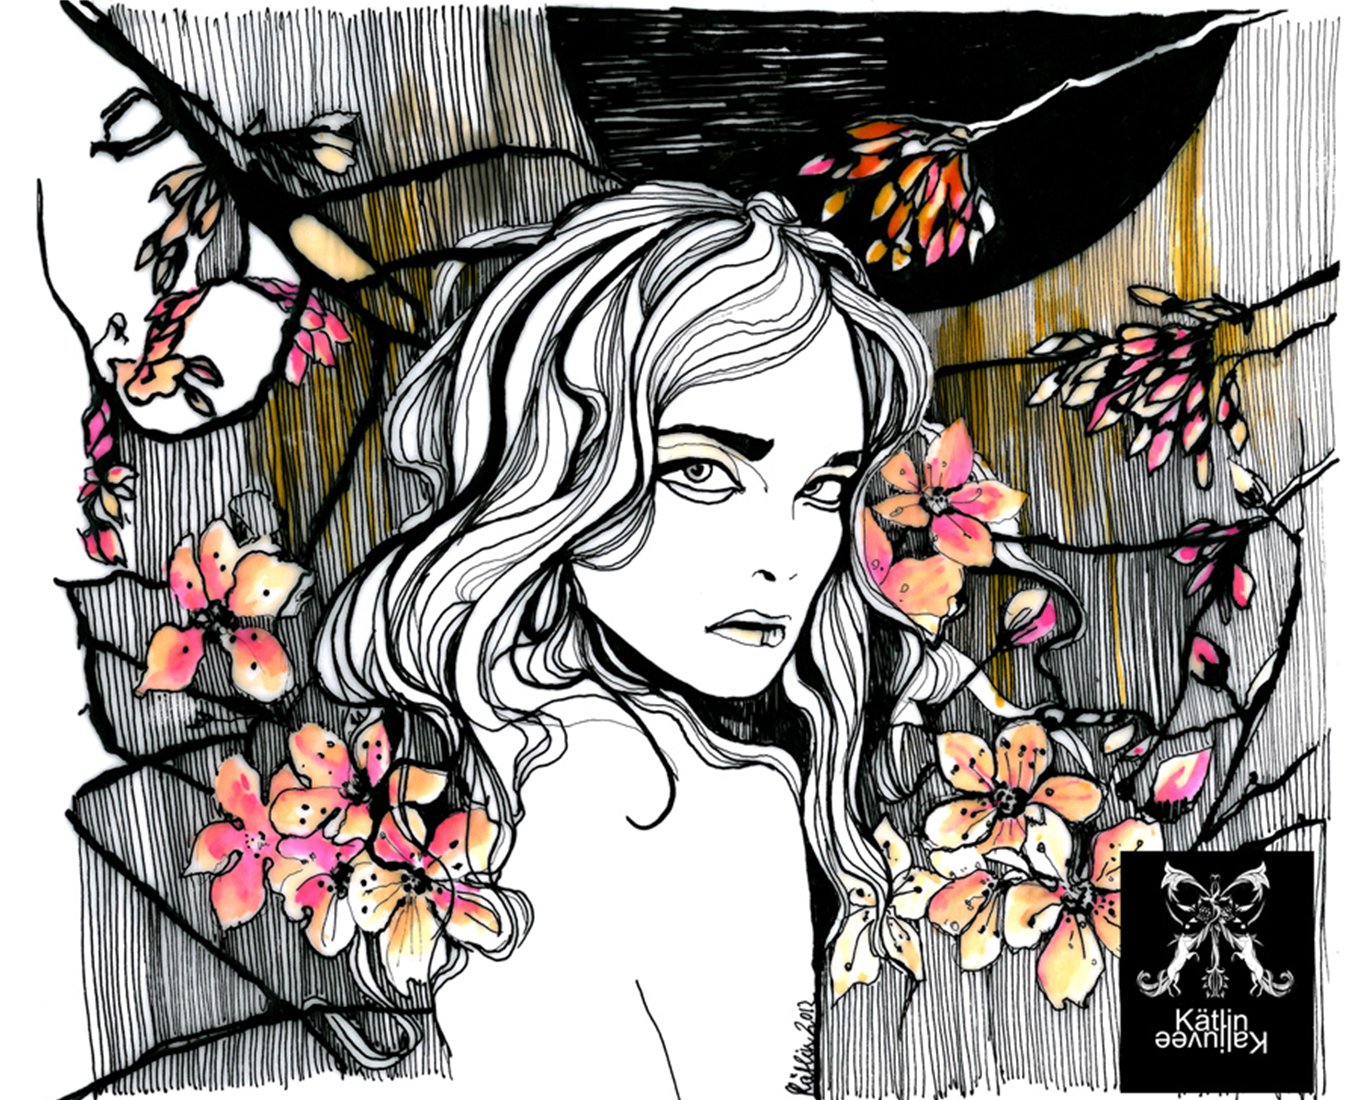 Drawing of a woman surrounded by flowers.